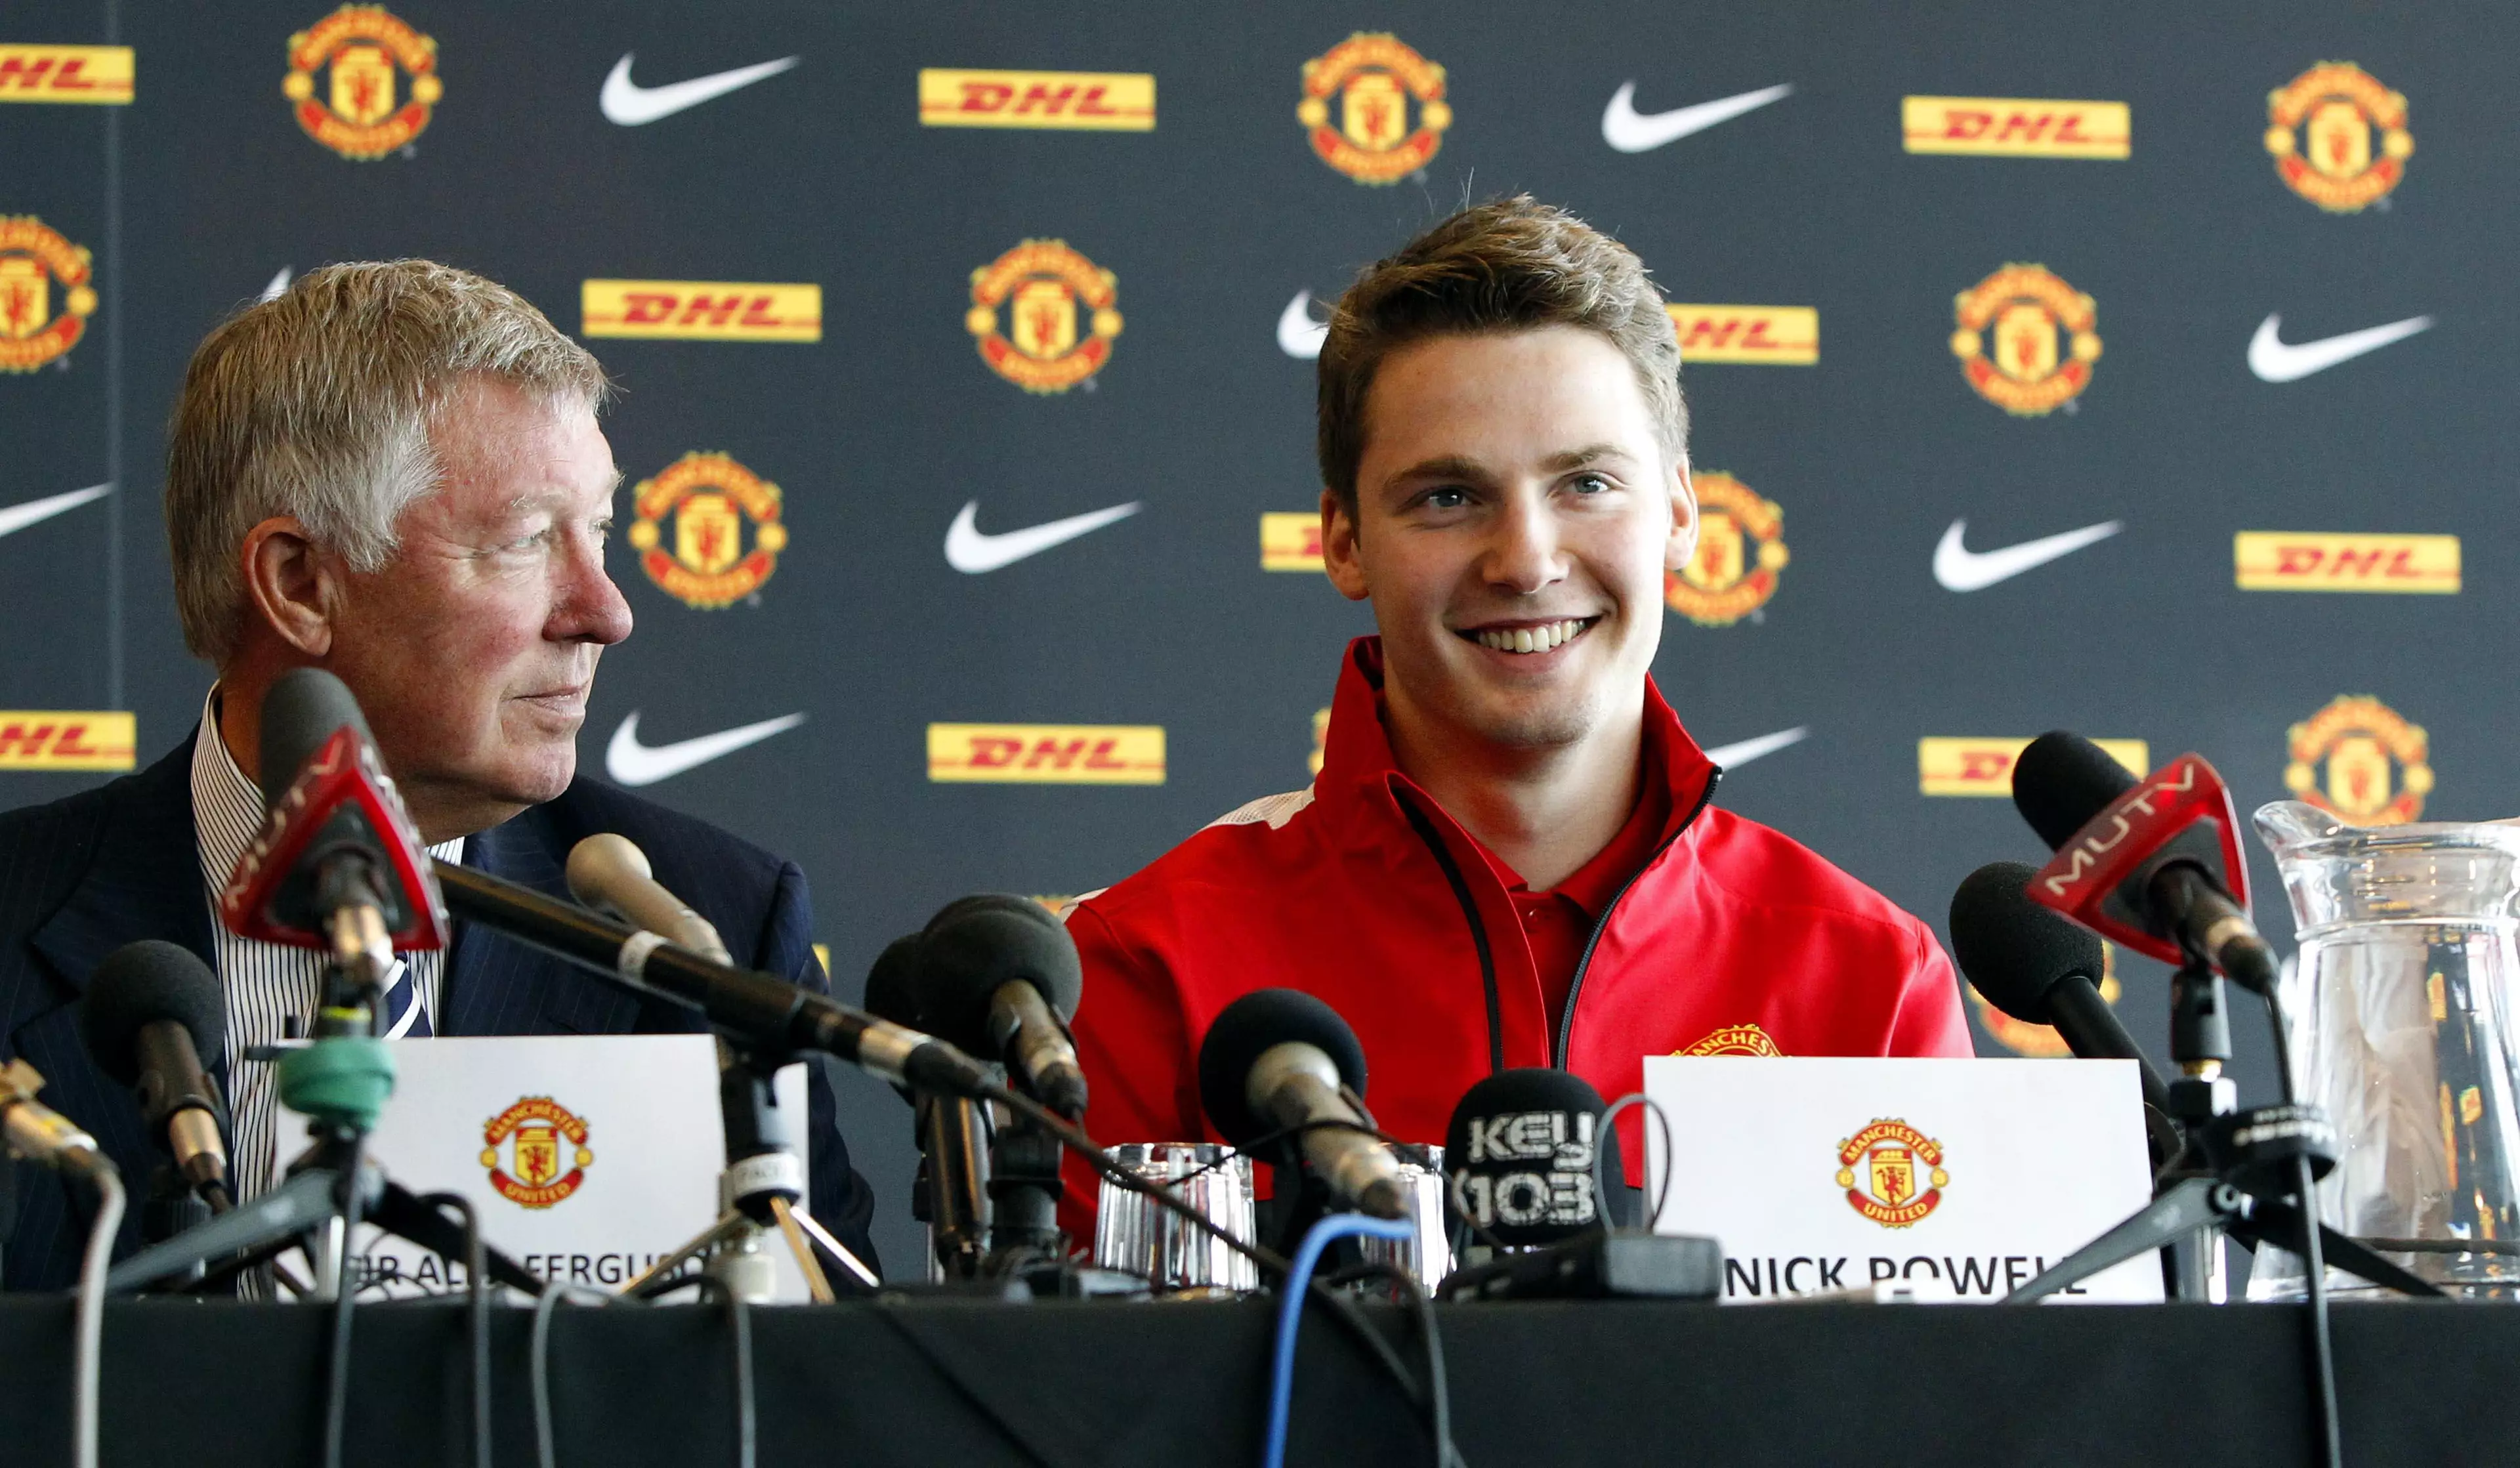 Fergie beat off competition from Manchester City to sign Nick Powell. Image: PA Images